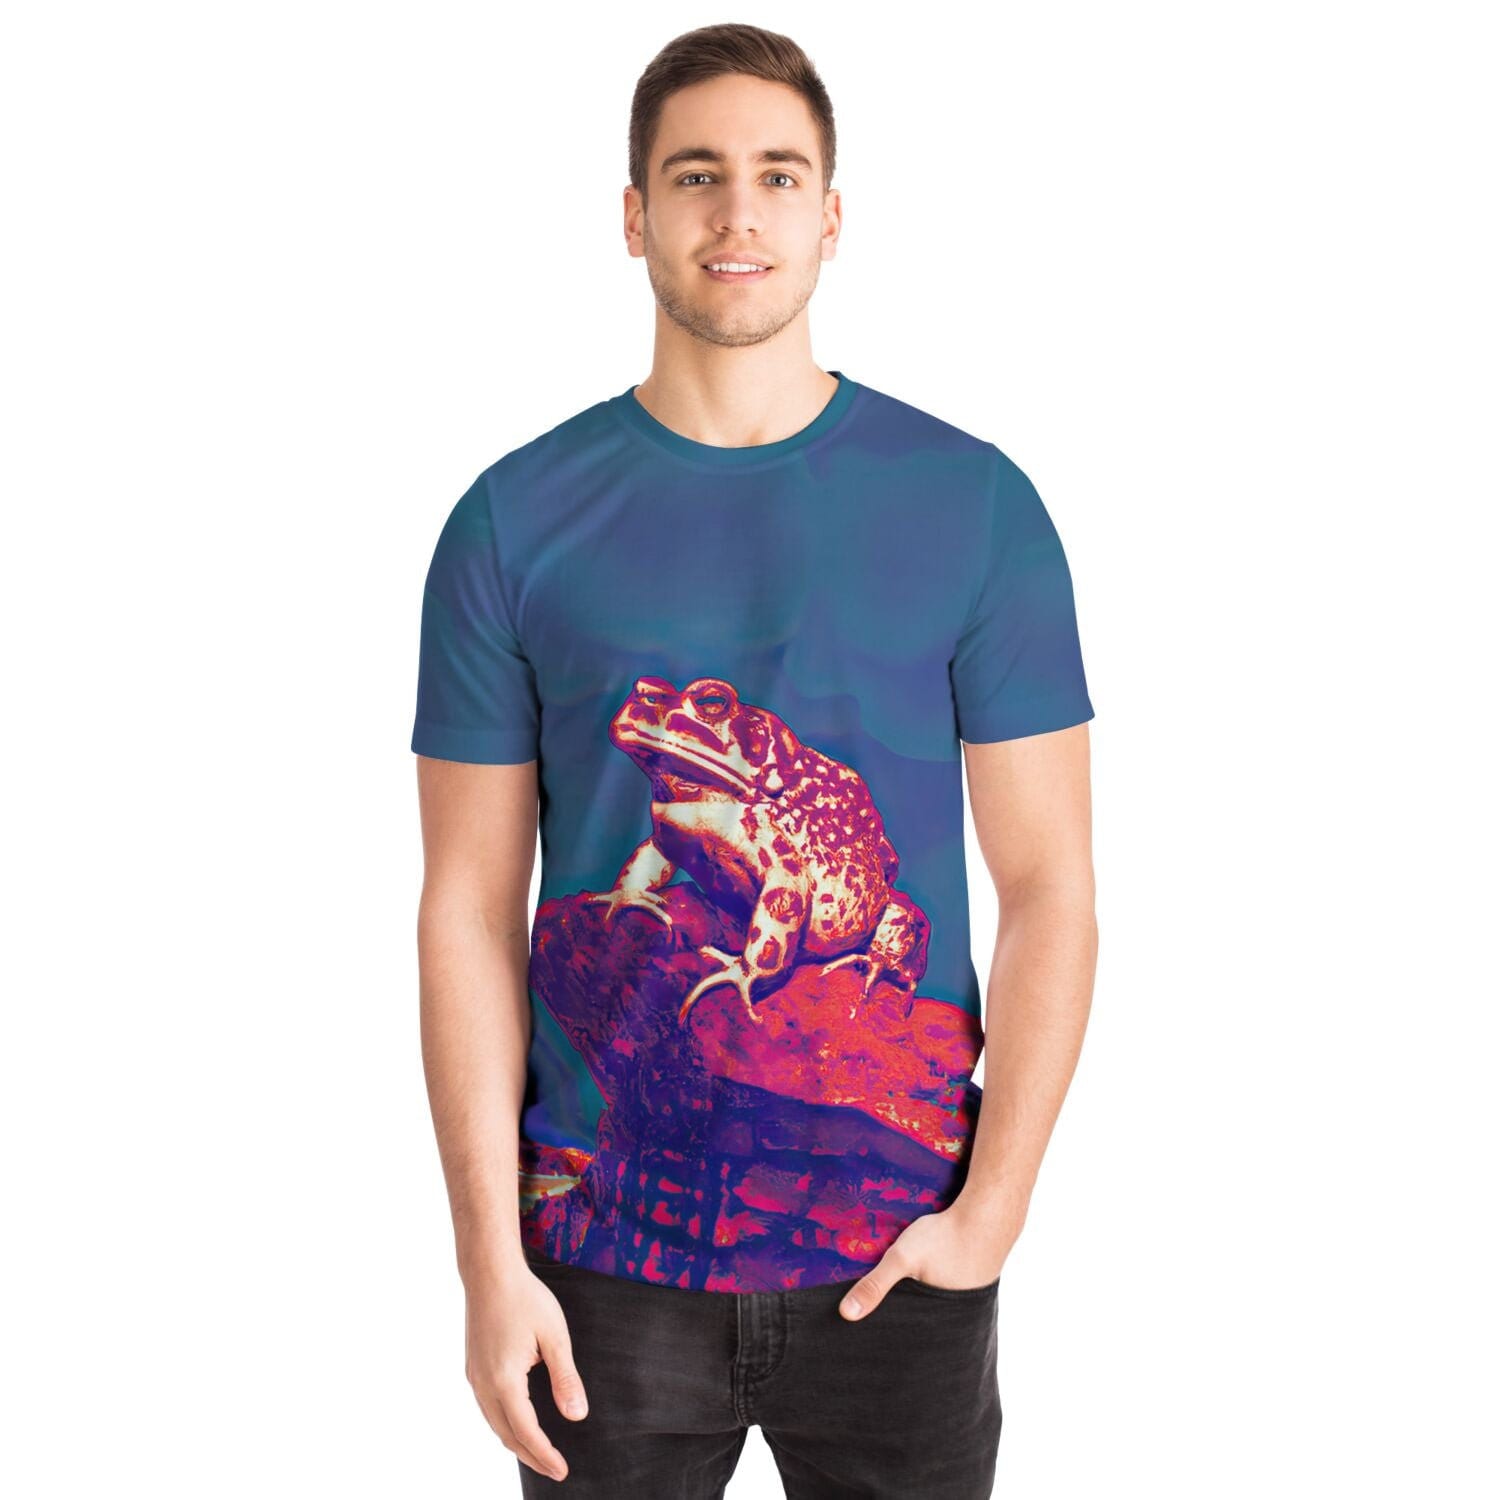 DMT Toad in the Sonoran Desert | Bufo Alvarius, DMT Psychedelic (Weed, 420, Cannabis) | Shamanic Vision Trippy Digital Art T-Shirt Tee